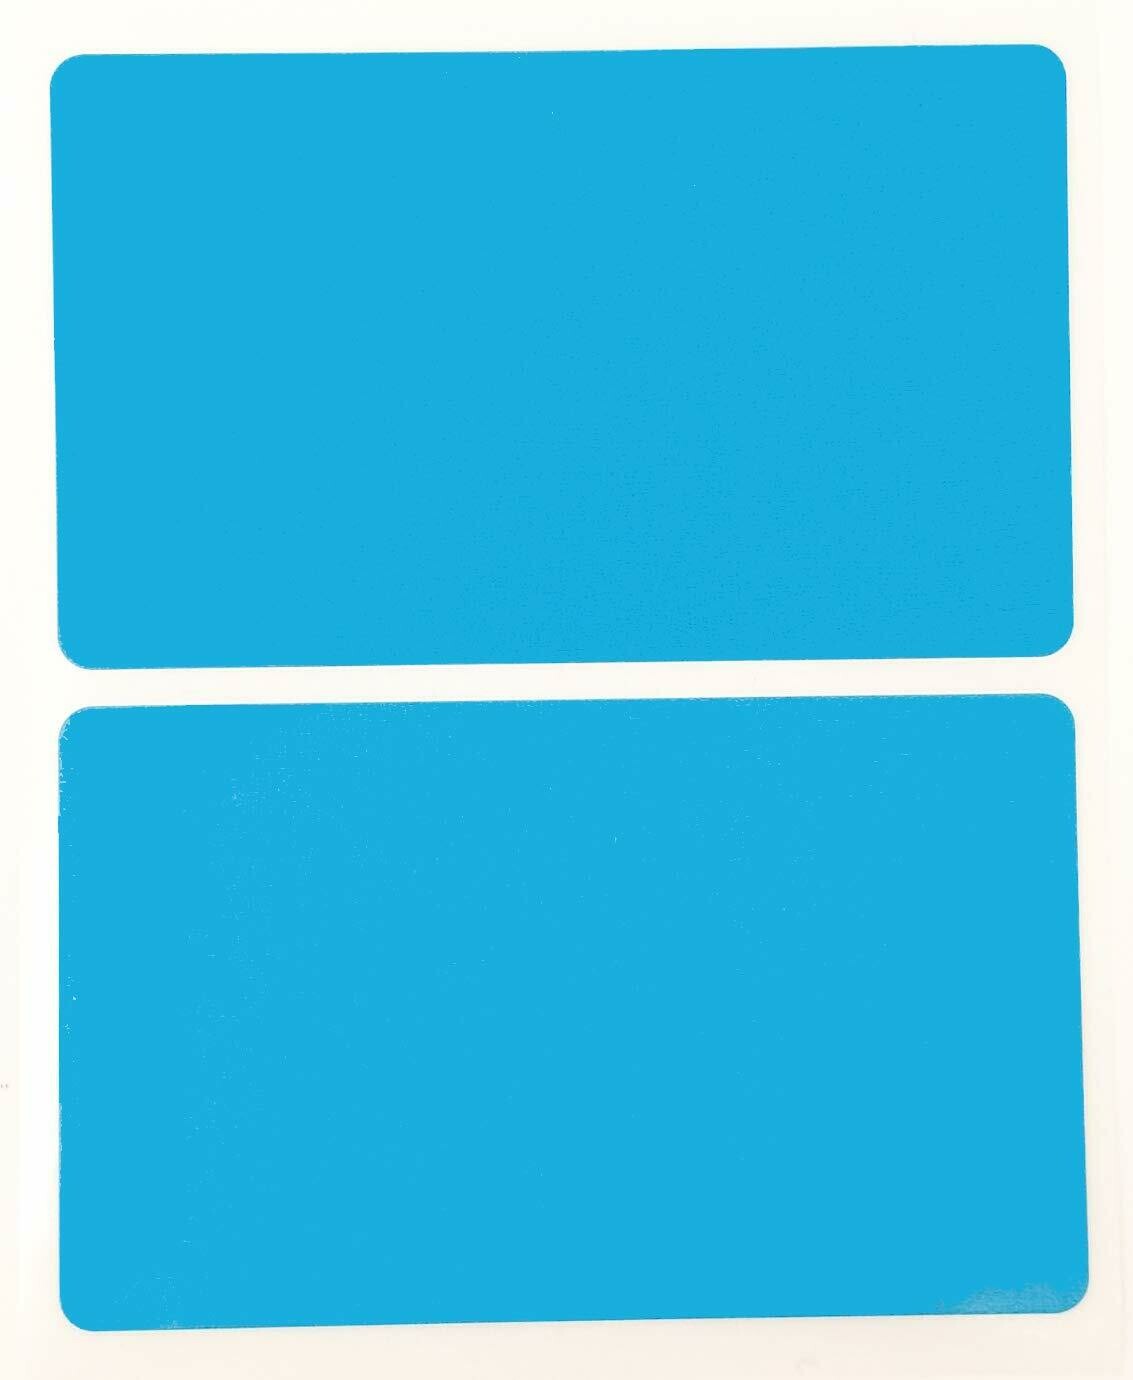 Tag-A-Room Color Coded Labels 2" x 3" Stickers 50 Count - Blue